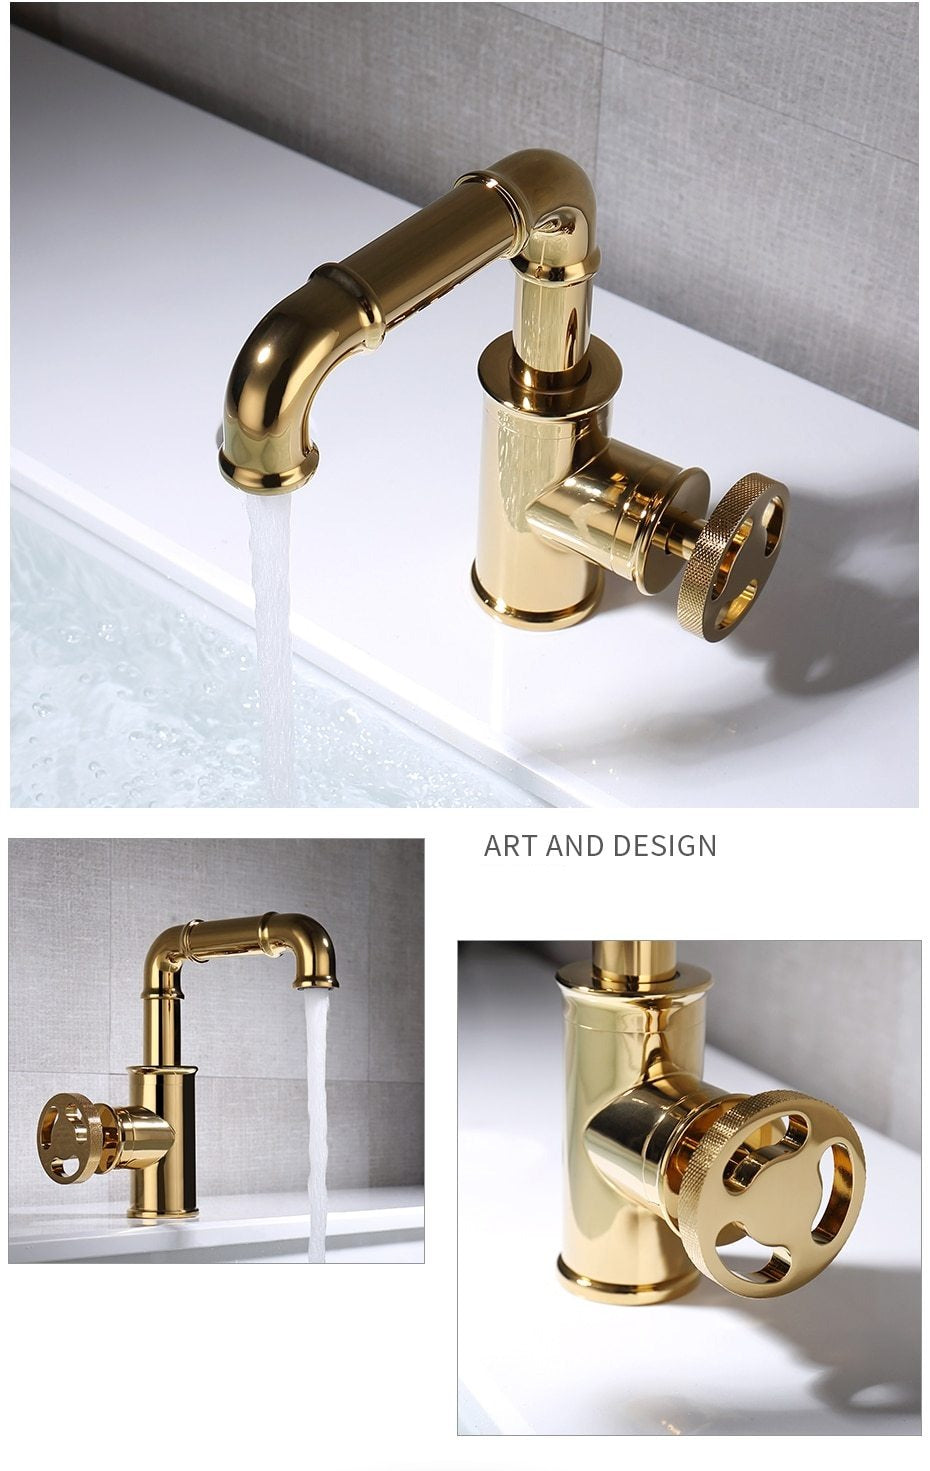 Multiple angle views of Industrial Bathroom Sink Faucet with polished brass finish. Single Handle, single hole mount